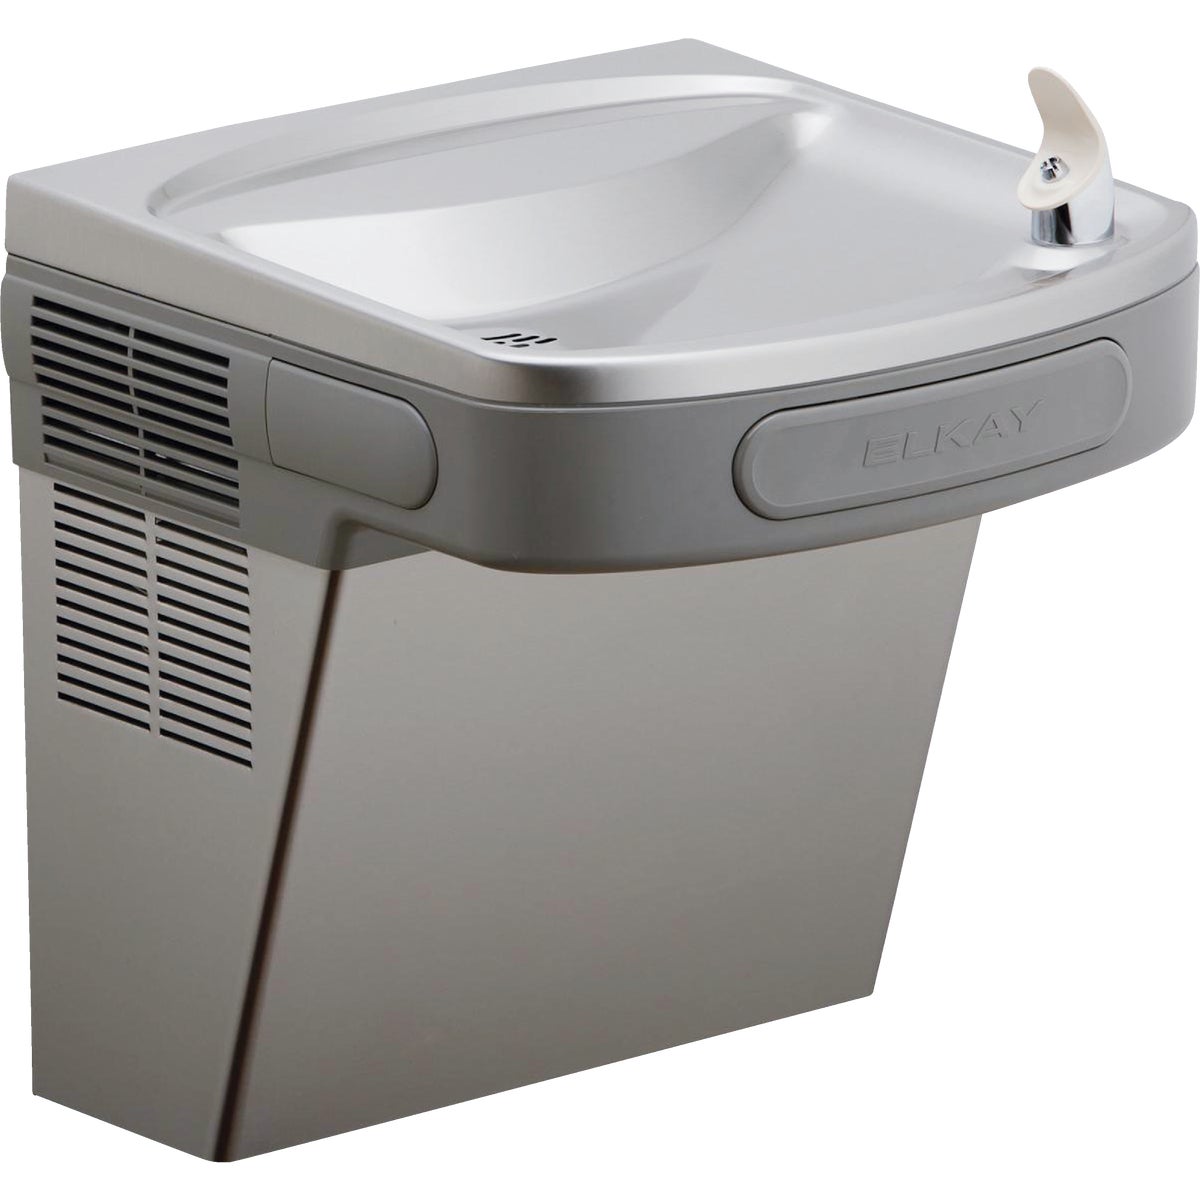 Item 460682, Drinking fountain featuring an ADA (Americans with Disabilities Act) 